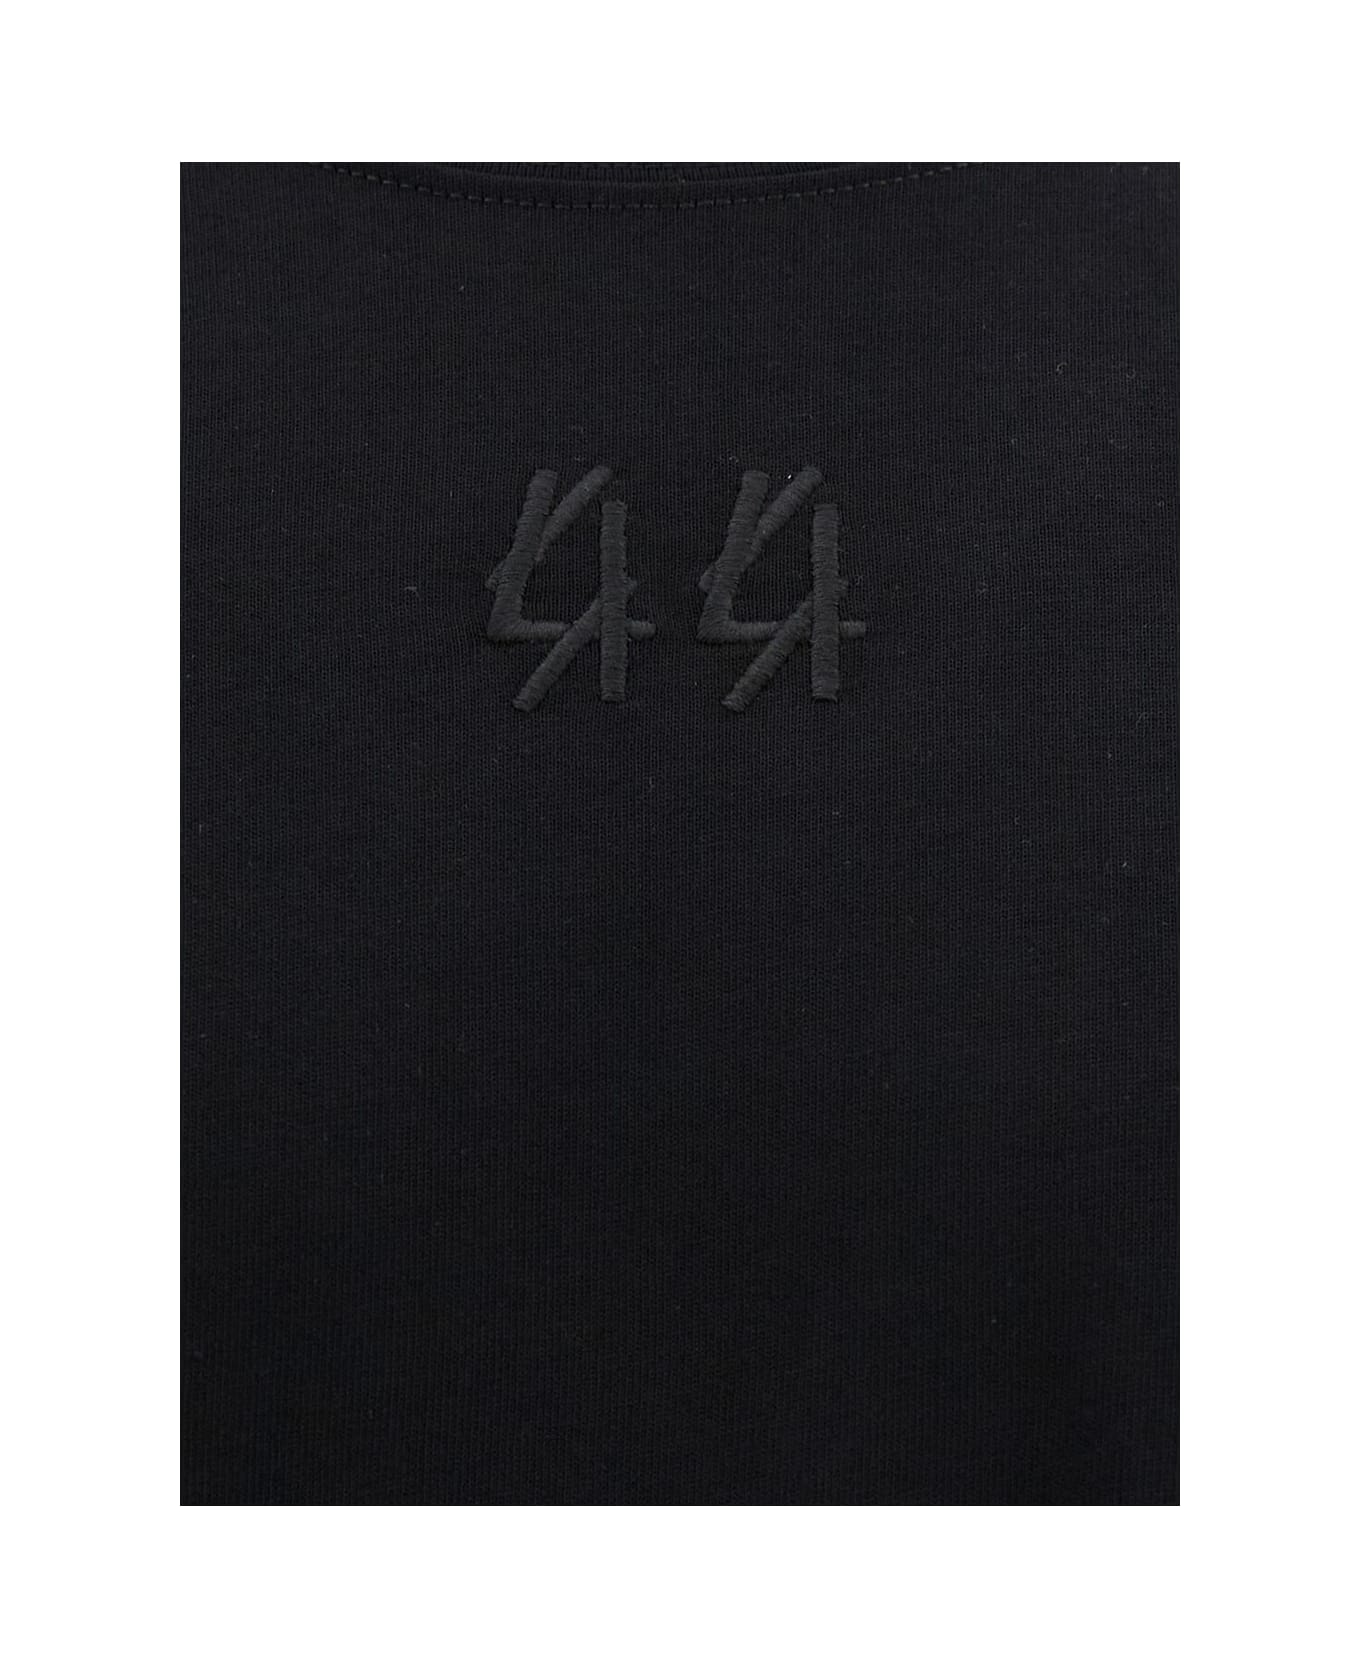 44 Label Group Black T-shirt With Logo Embroidery And Print In Cotton Man - Black